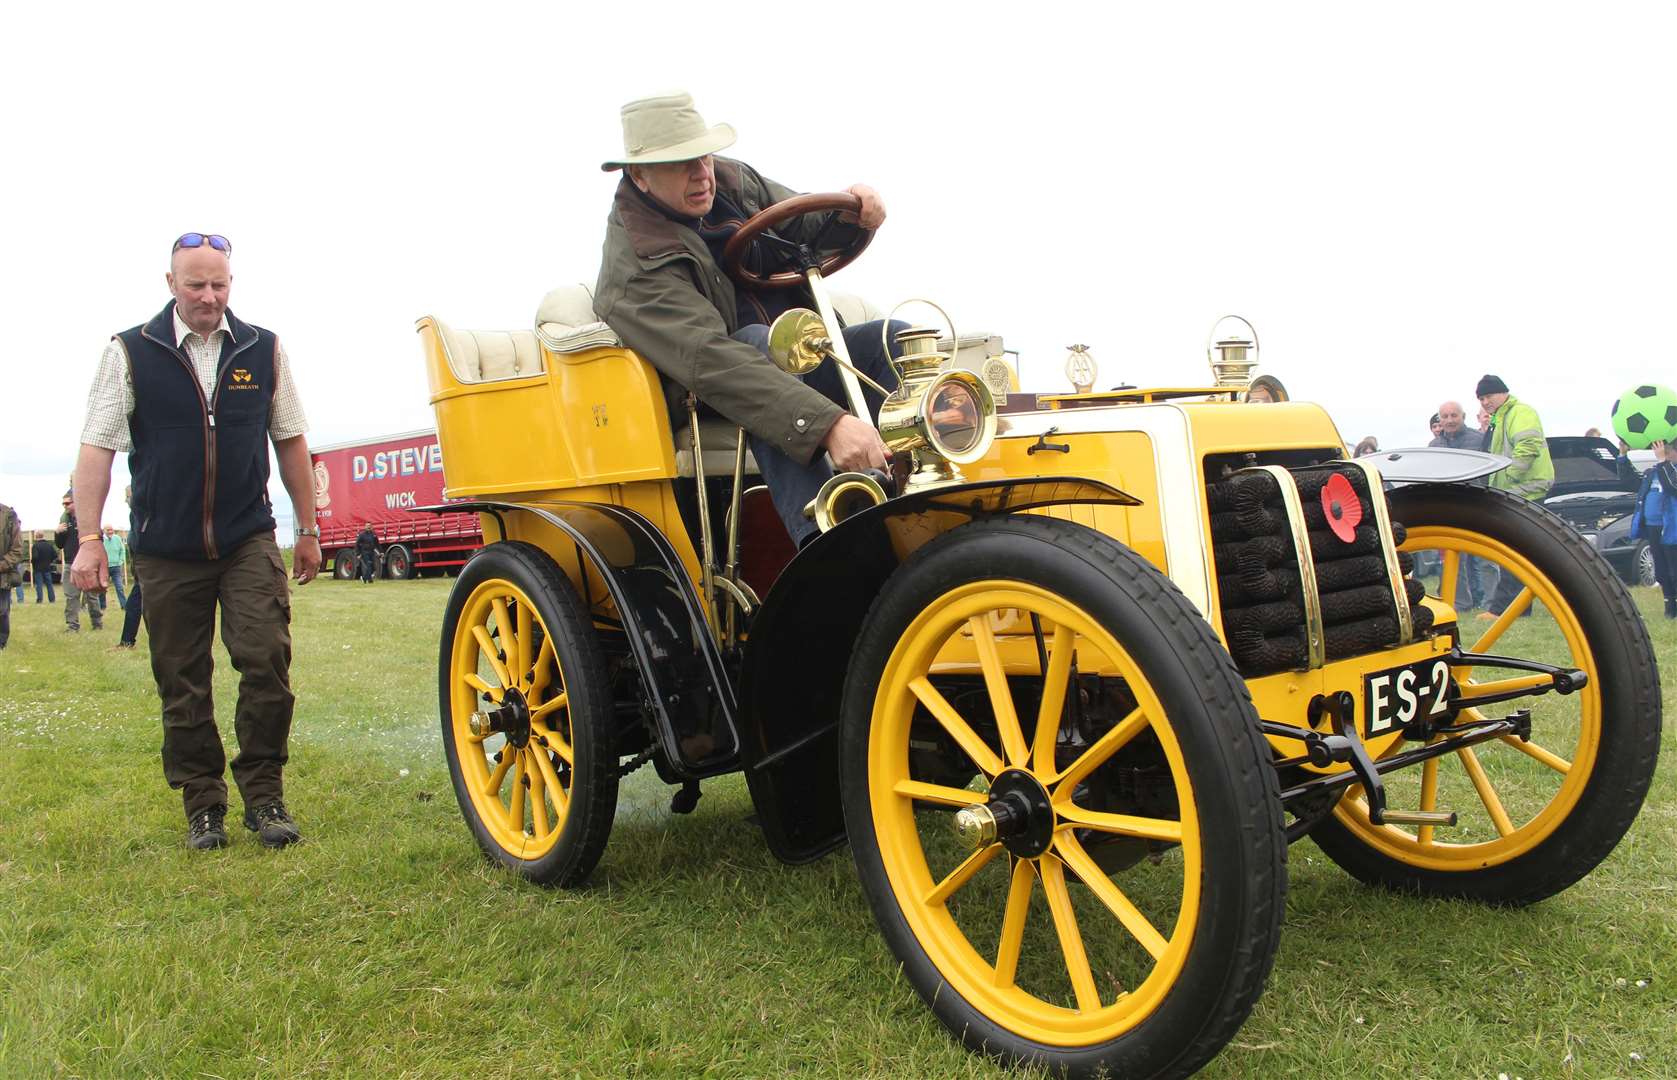 Stuart Wyndham Murray Threipland, of Dunbeath, had the oldest car on the field at the 2019 Caithness and Sutherland Vintage and Classic Vehicle Club rally at John O'Groats – a 1902 Panhard-Levassor Tonneau. Picture: Alan Hendry